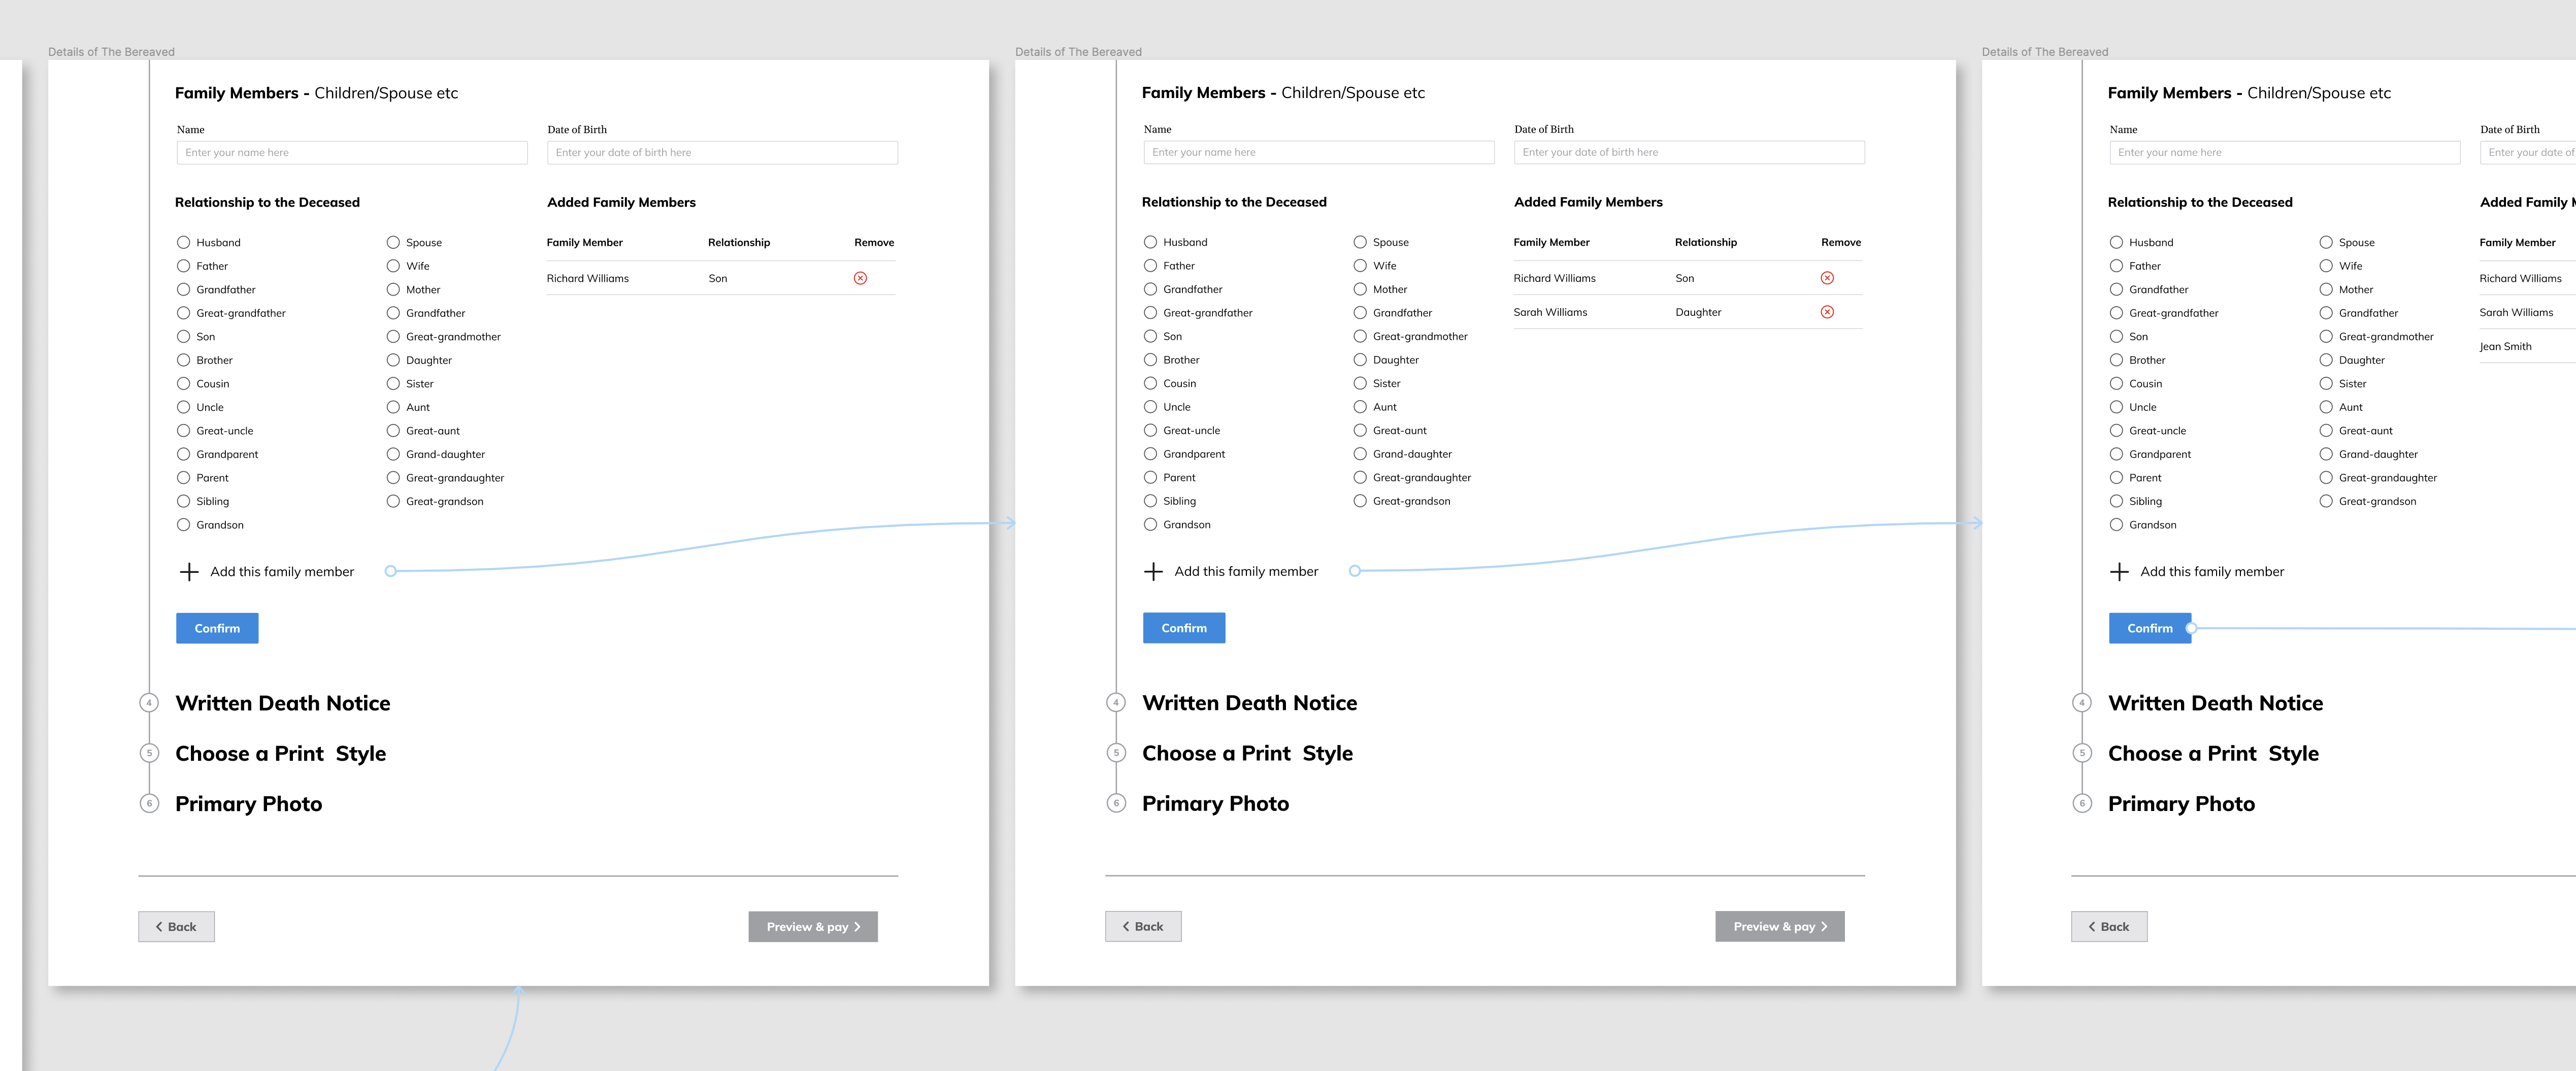 An image of the Add a Family Member concept in Figma.